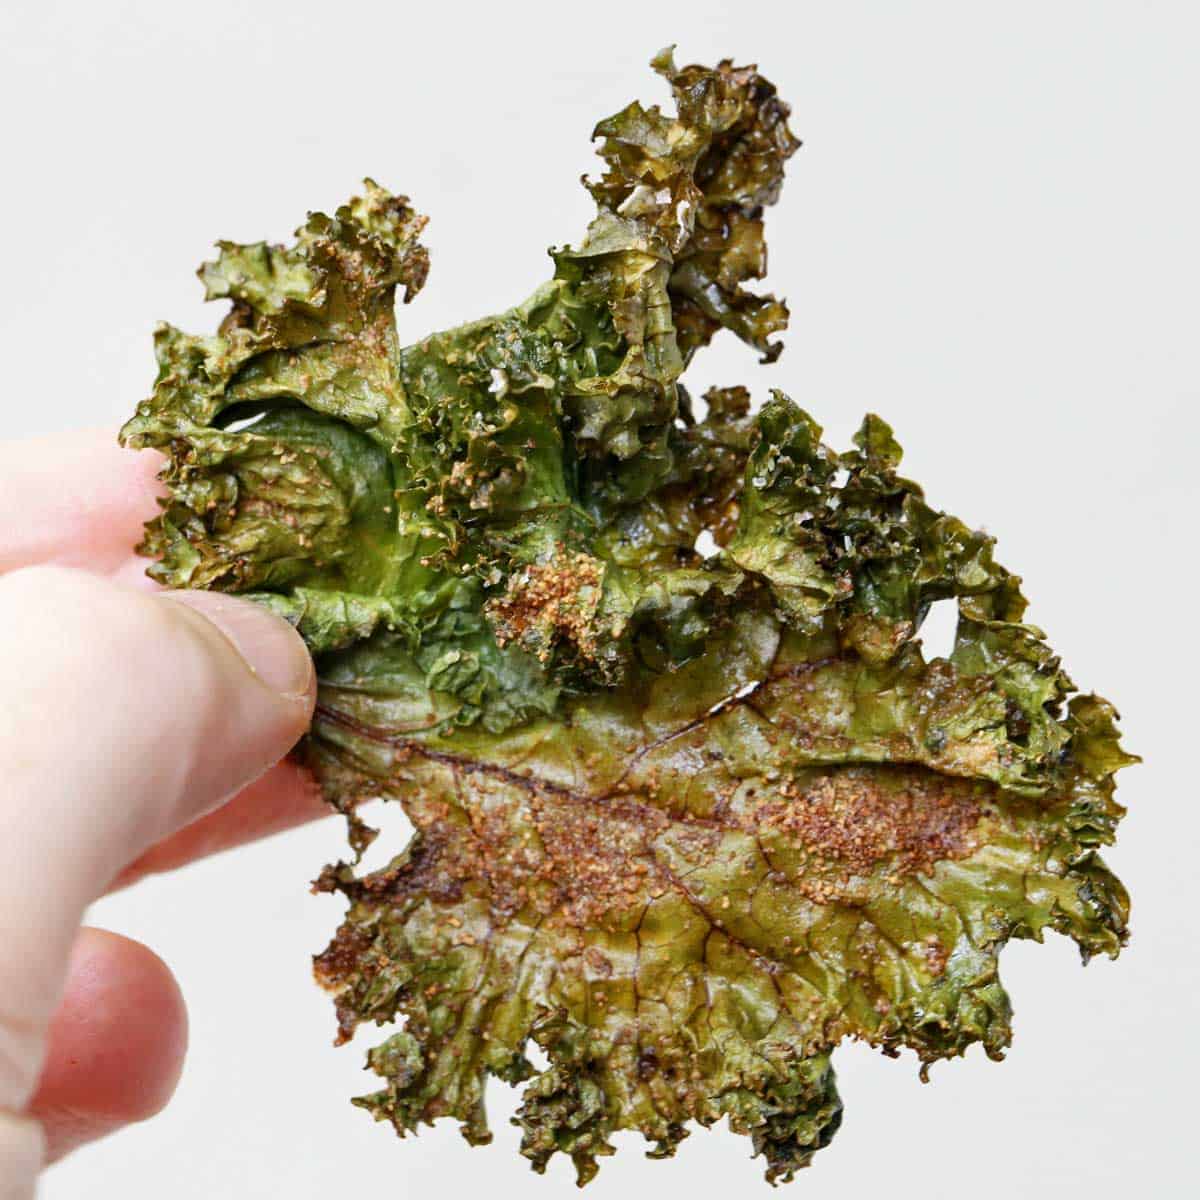 A hand holding up a kale chip.